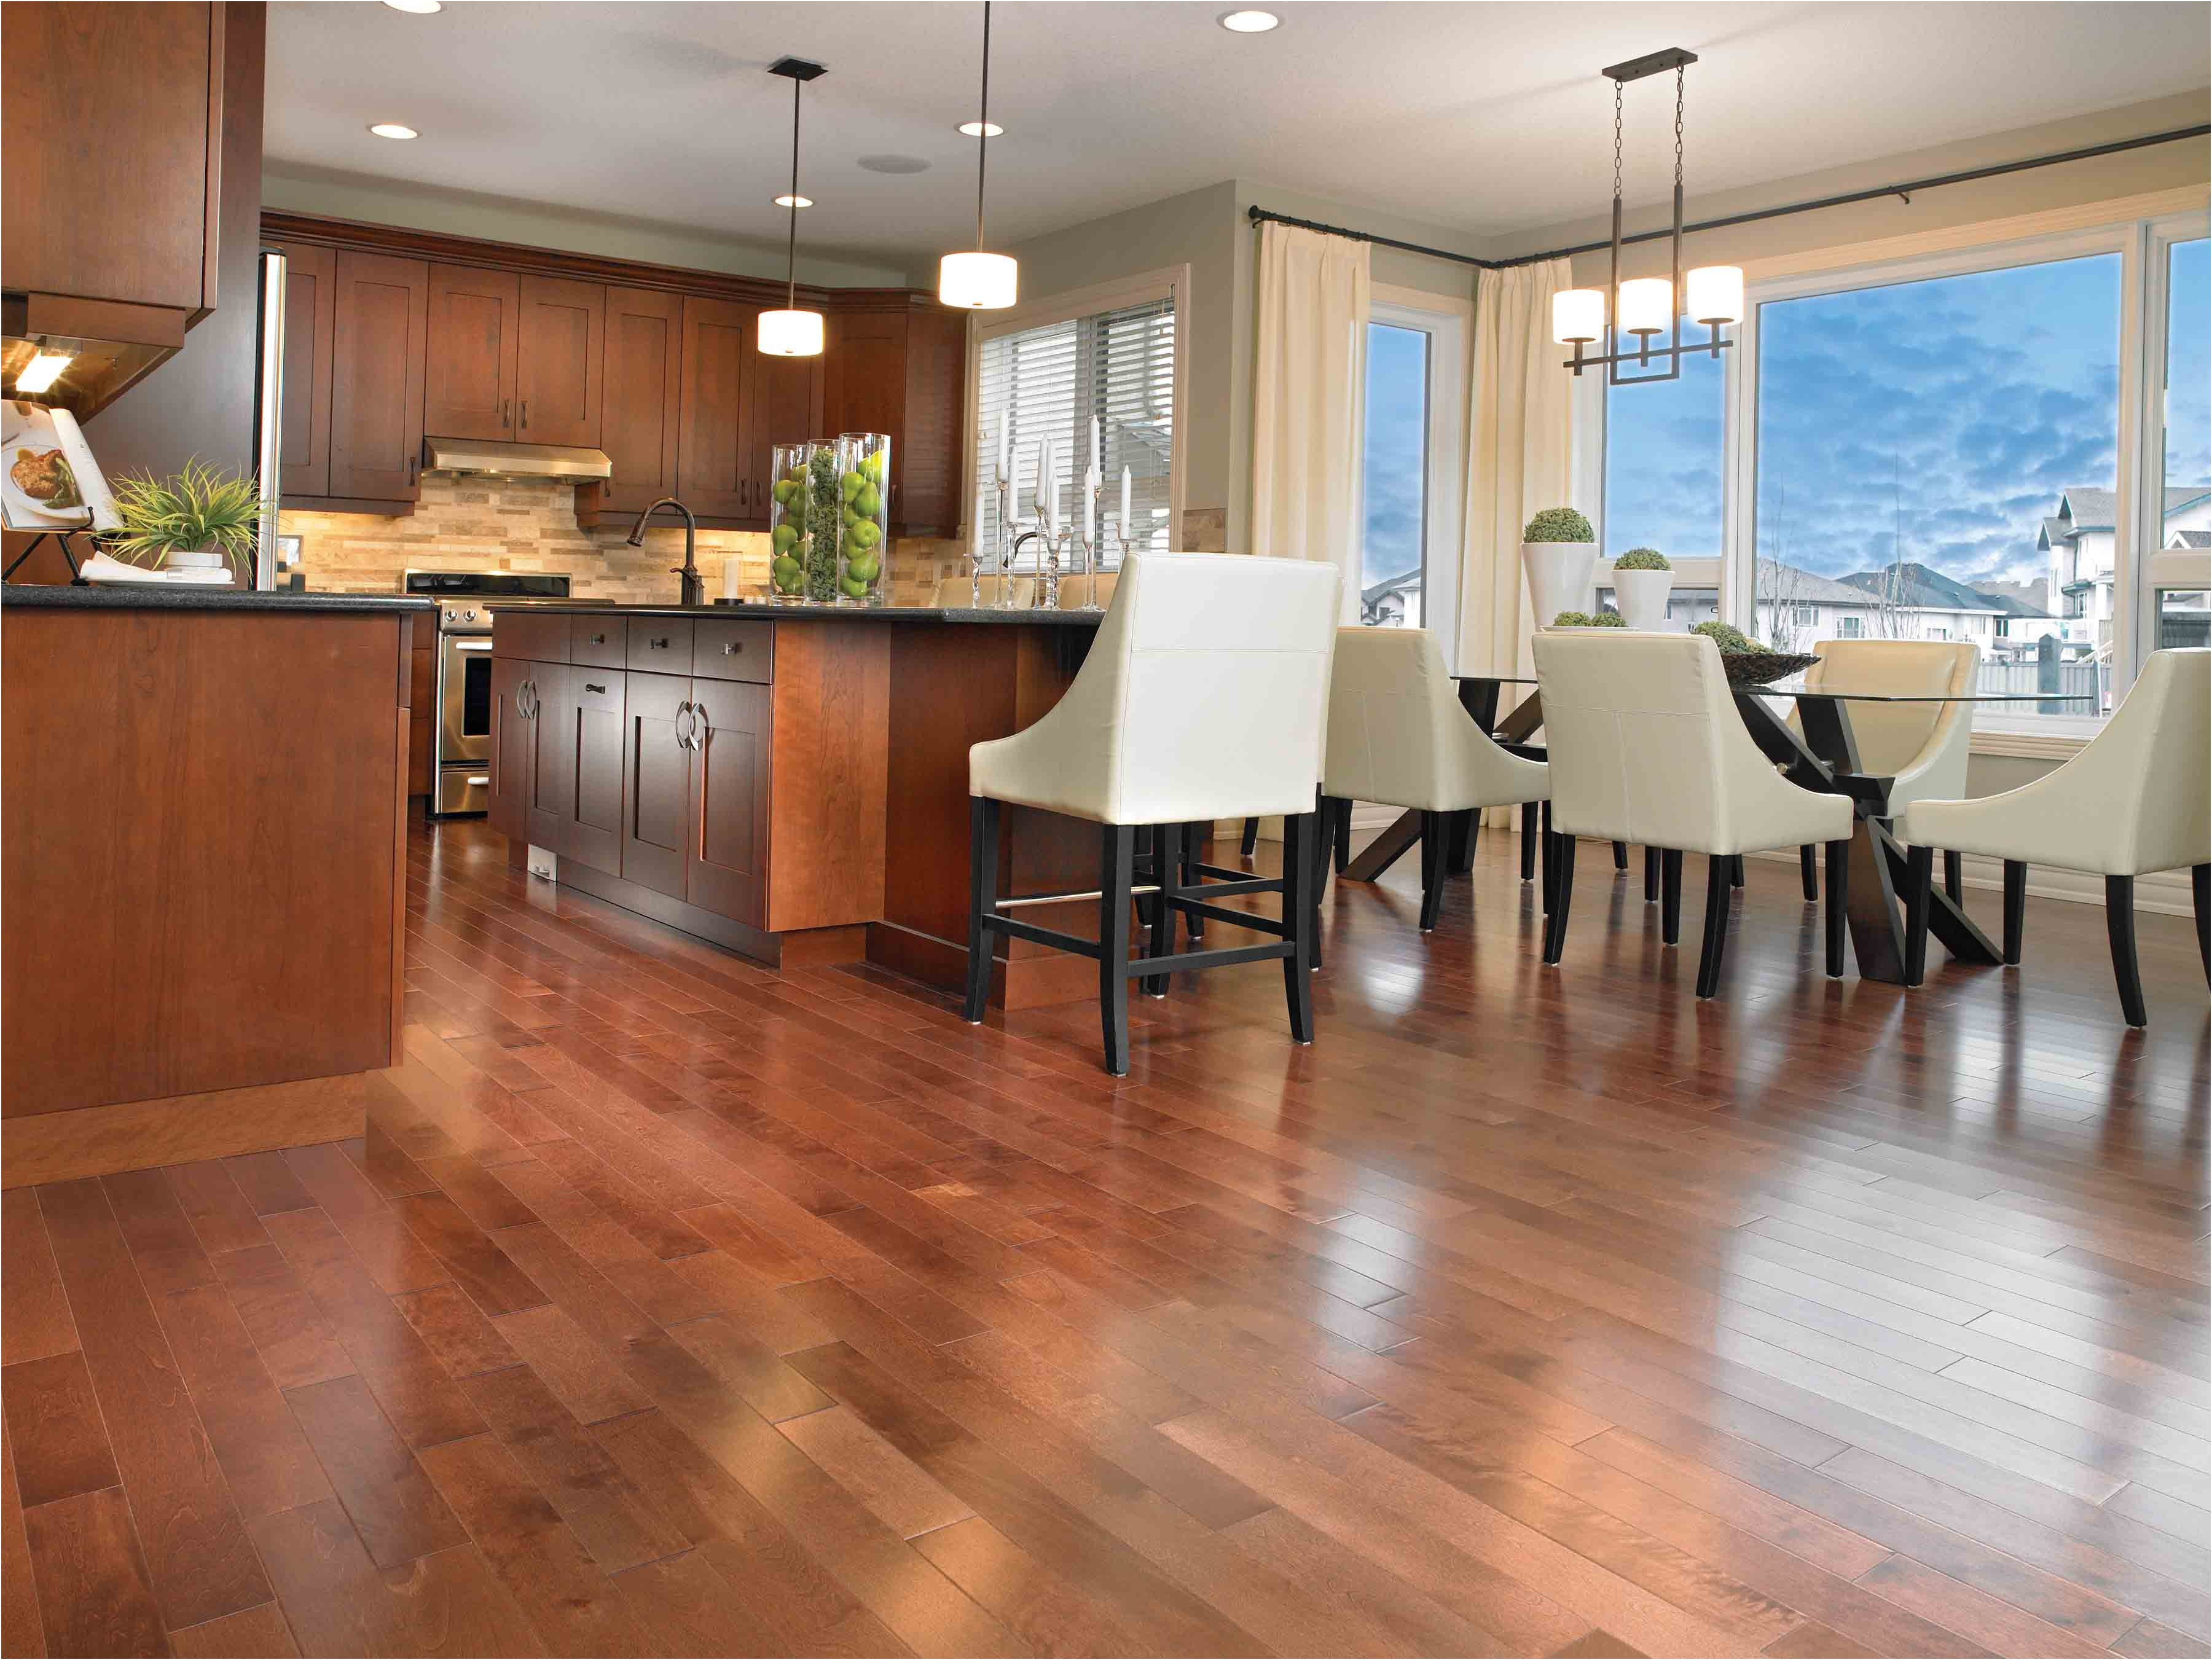 bamboo flooring cost vs hardwood cost of what color laminate flooring with oak cabinets stock engineered within what color laminate flooring with oak cabinets stock engineered hardwood vs hardwood cost best laminate for